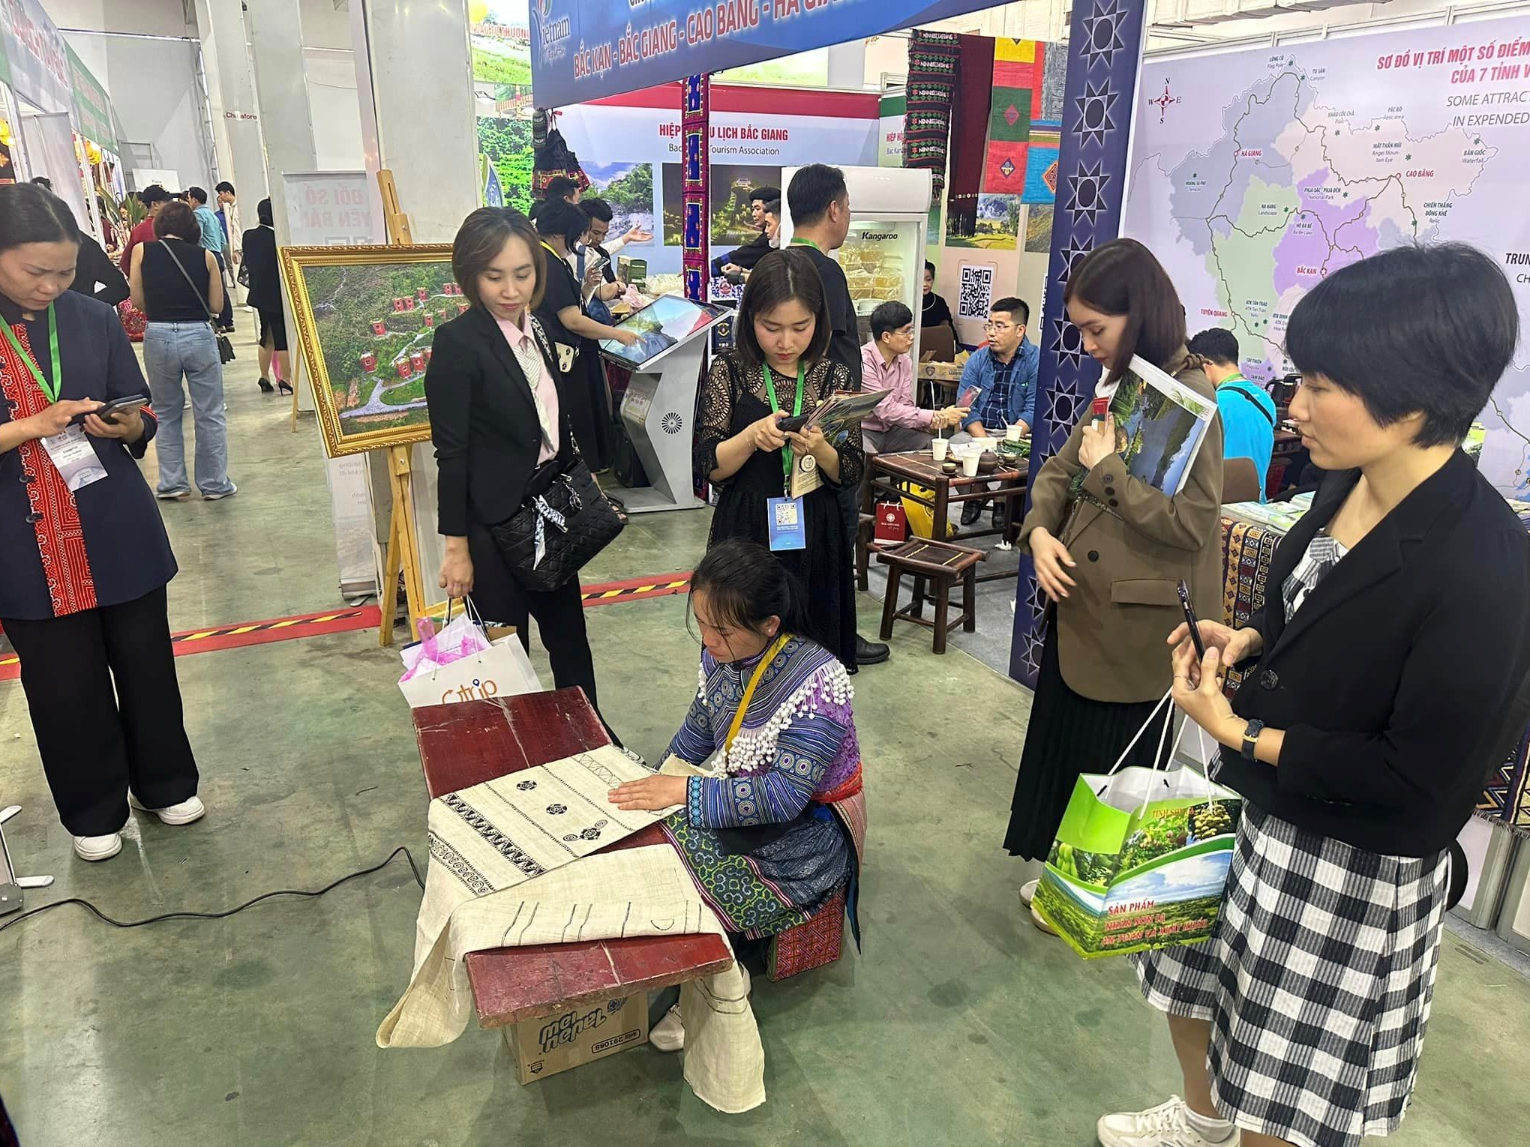 Lao Cai attended the international tourism fair VITM in Hanoi 